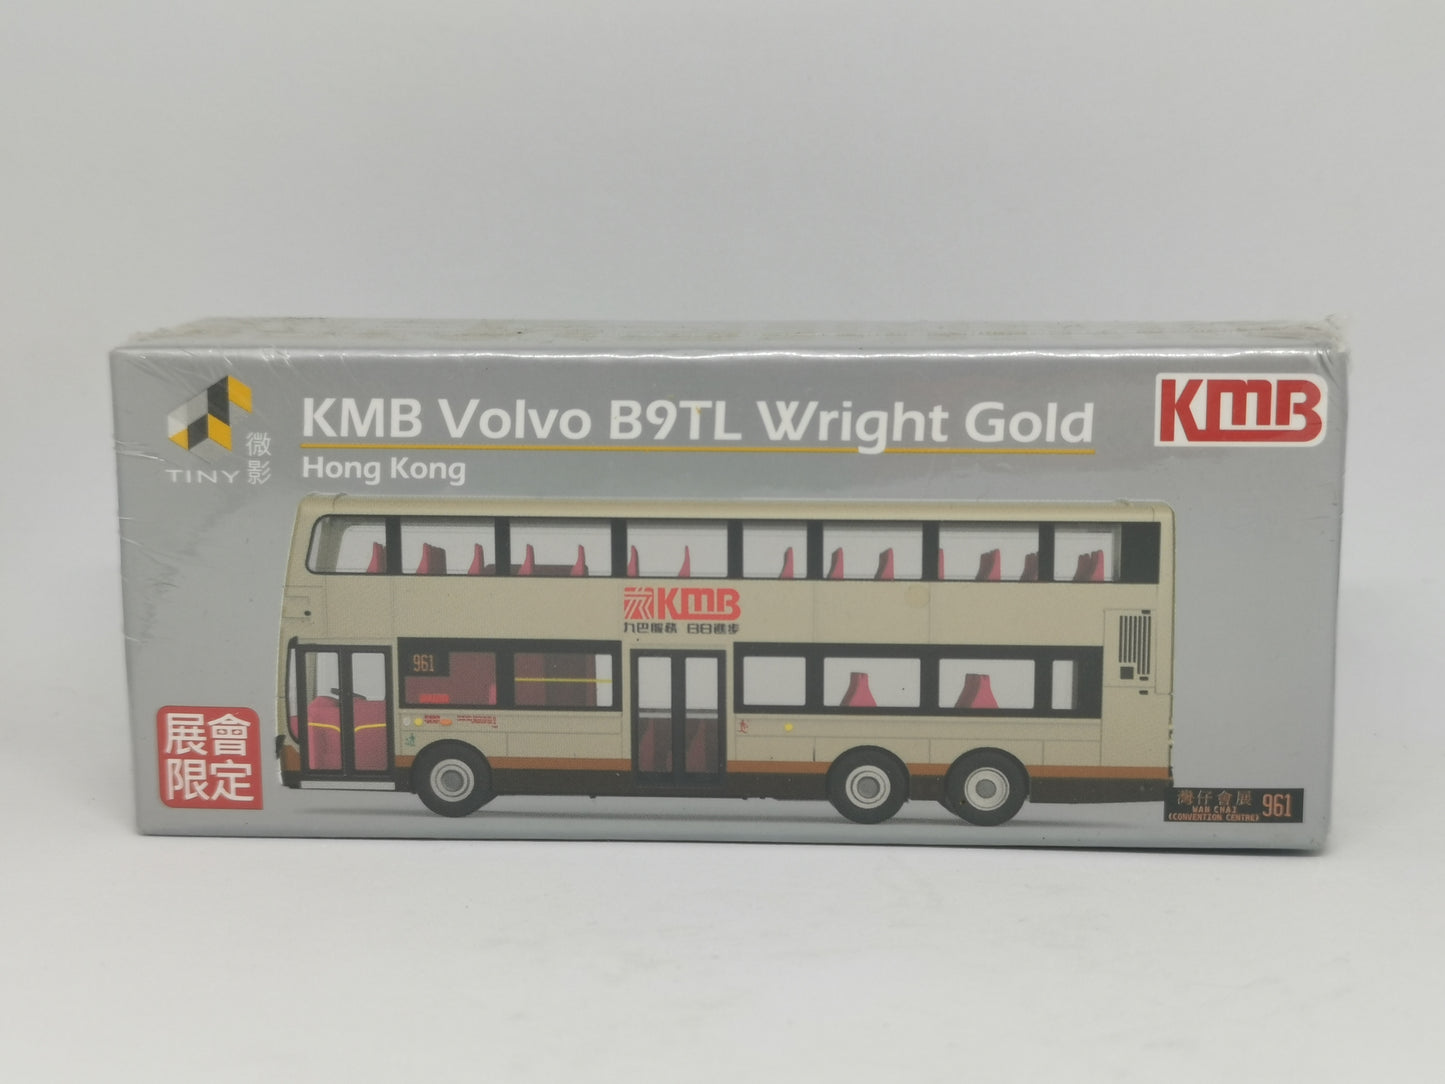 Tiny Hong Kong Event exclusive KMB Volvo B9TL Wright Gold Double Deck Bus